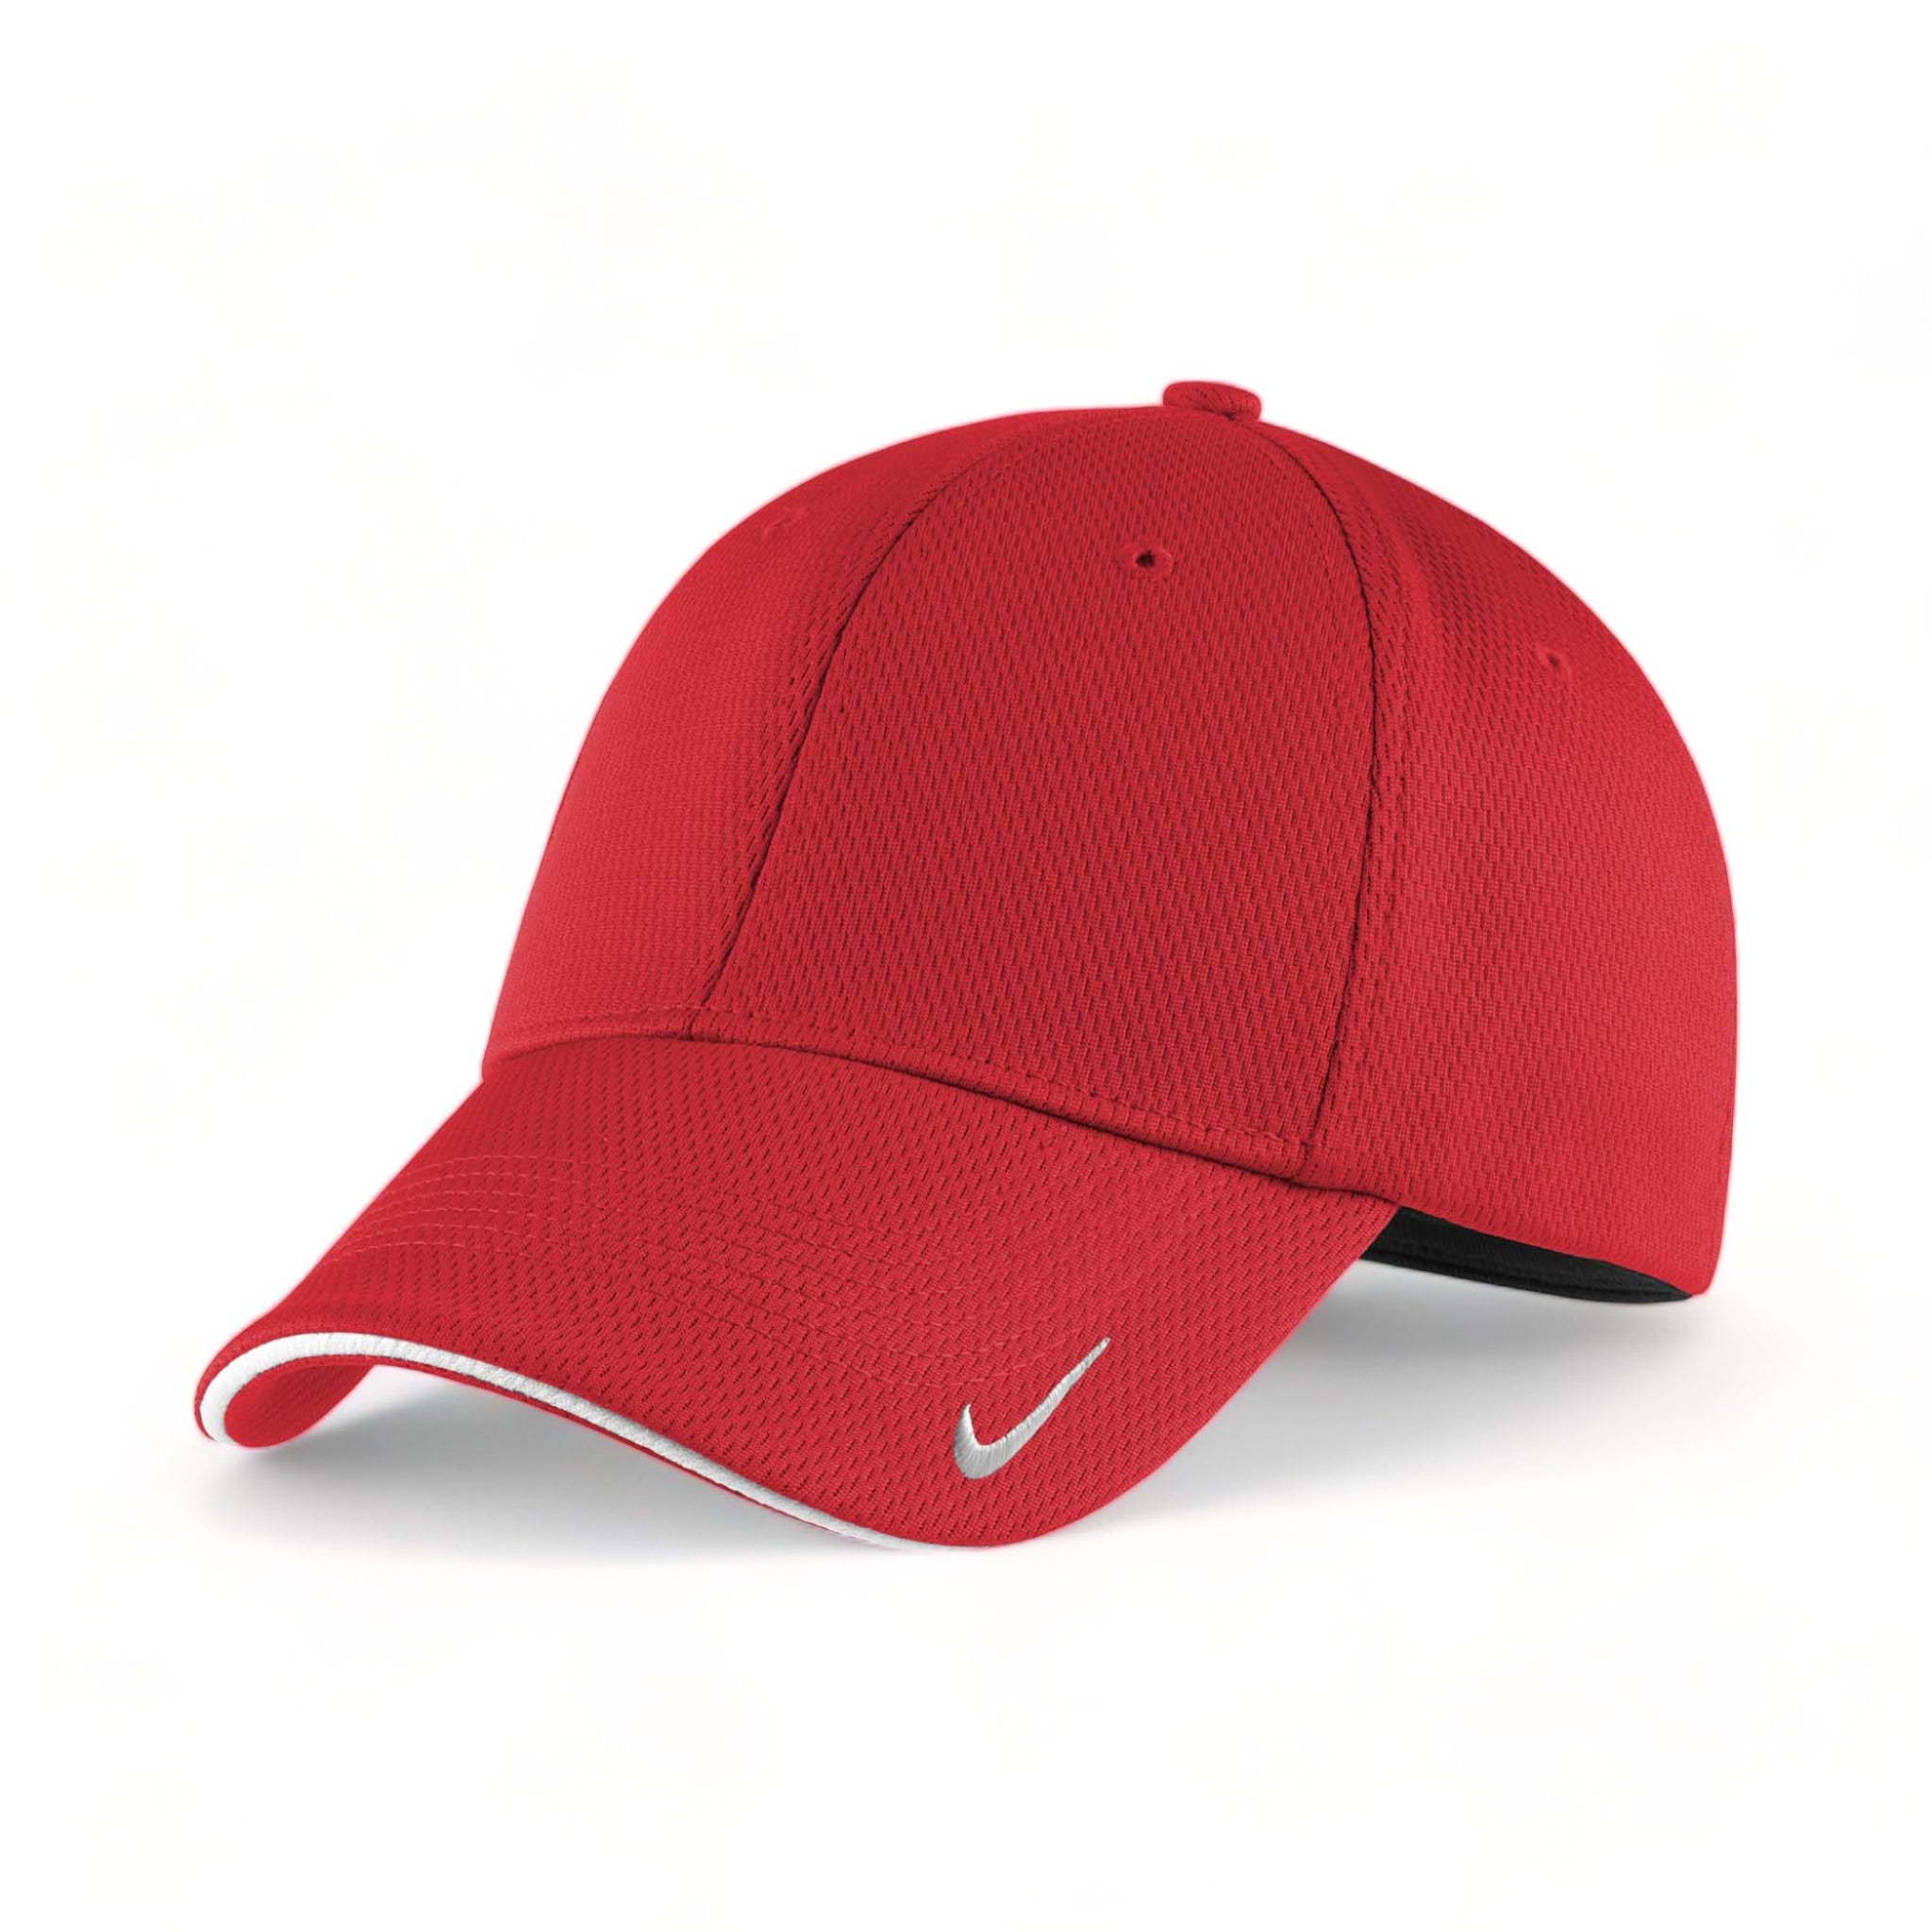 Side view of Nike NKFD9718 custom hat in university red and white